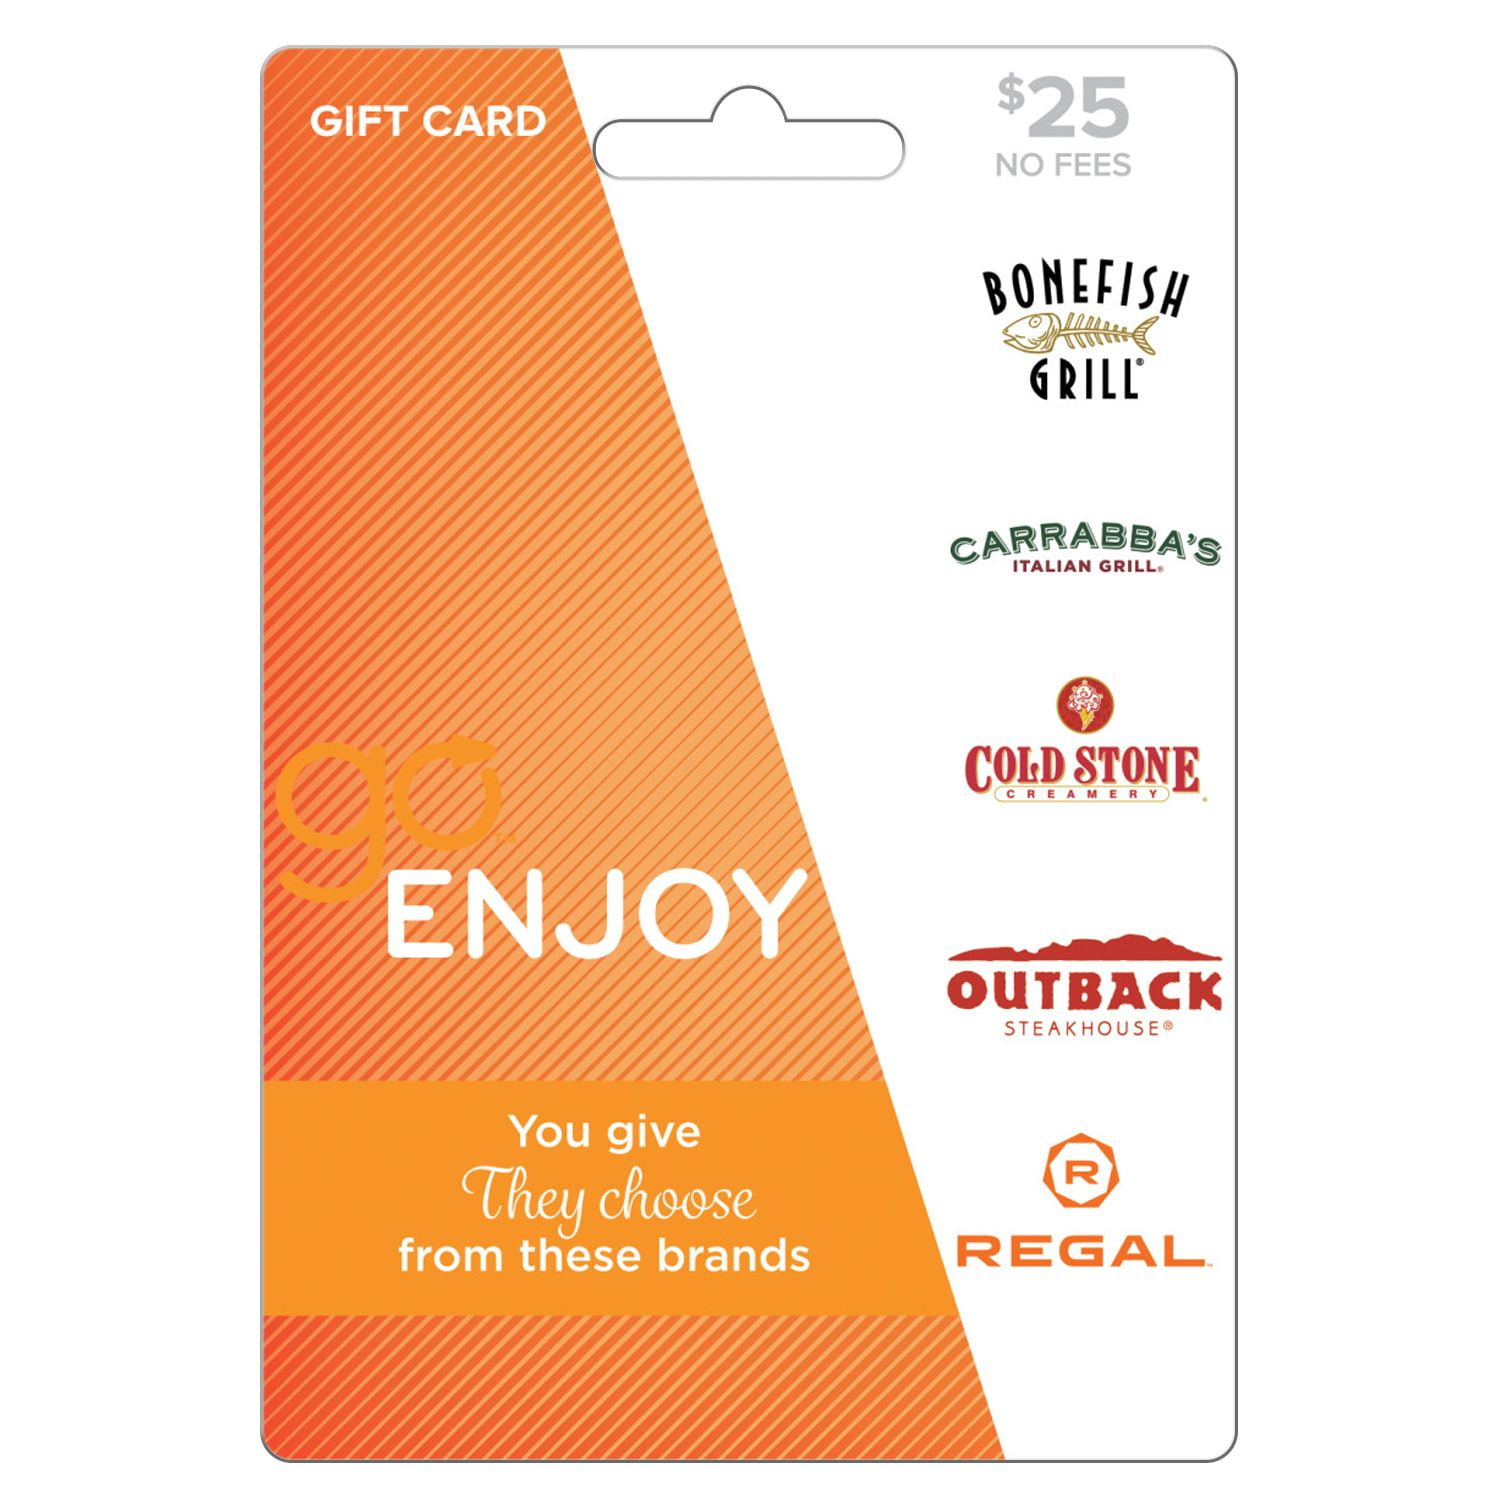 Gift Cards - Specialty Gifts Cards - Restaurant Gift Cards - Walmart.com